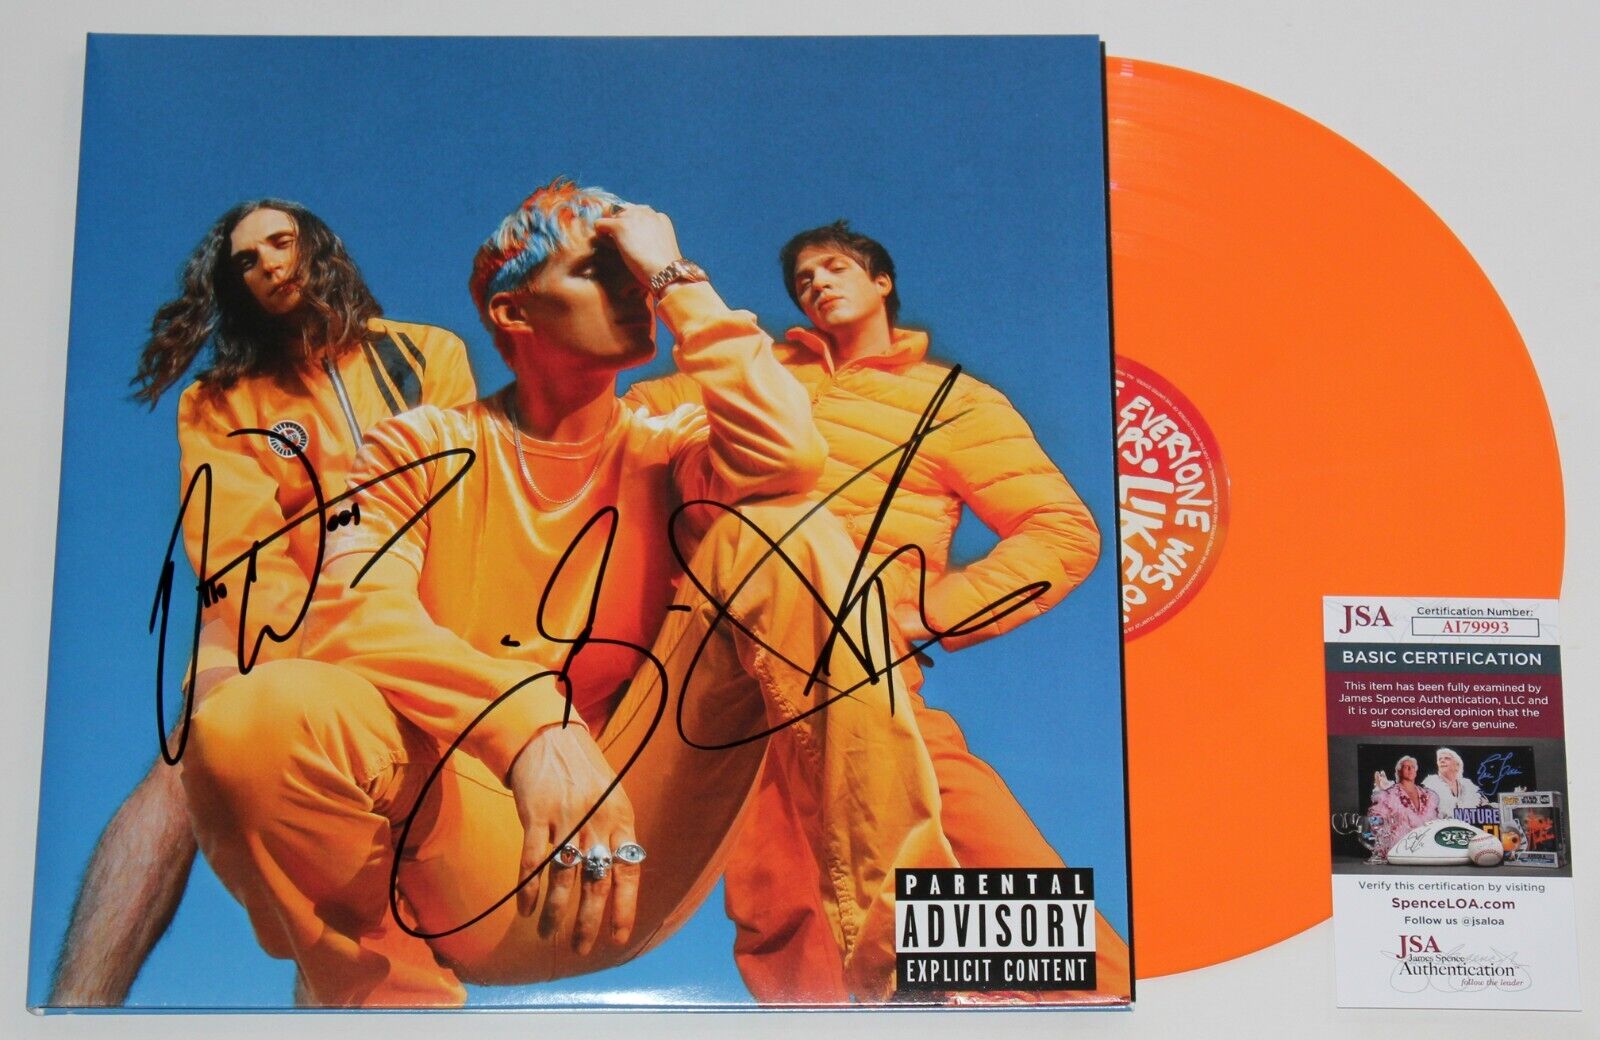 WATERPARKS BAND SIGNED GREATEST HITS LP VINYL RECORD ALBUM AUTOGRAPHED +JSA COA